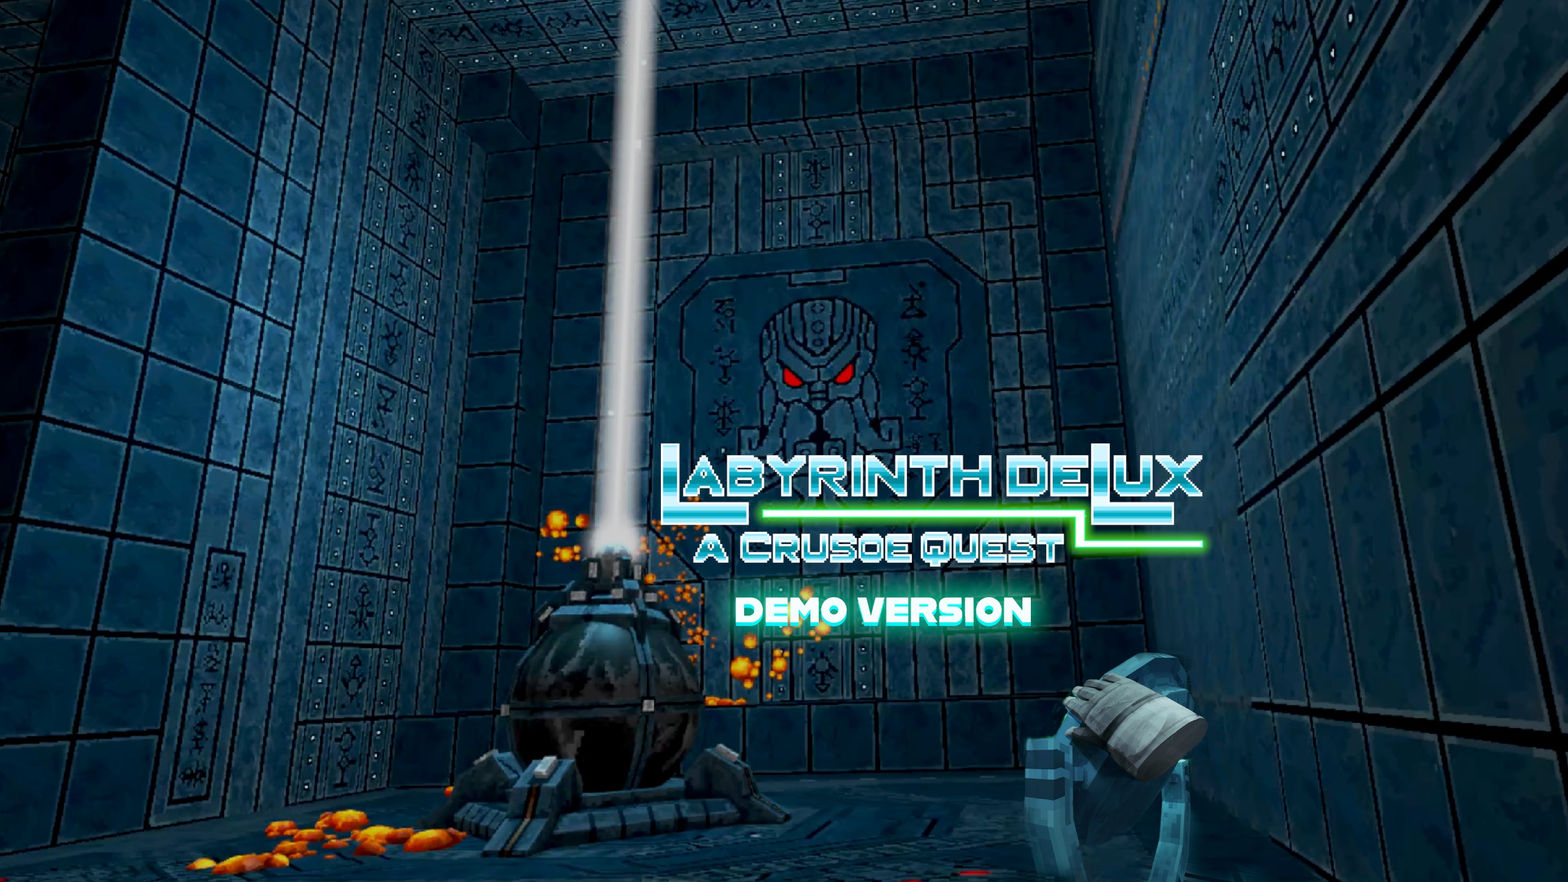 Labyrinth deLux - A Crusoe Quest (Free Demo)